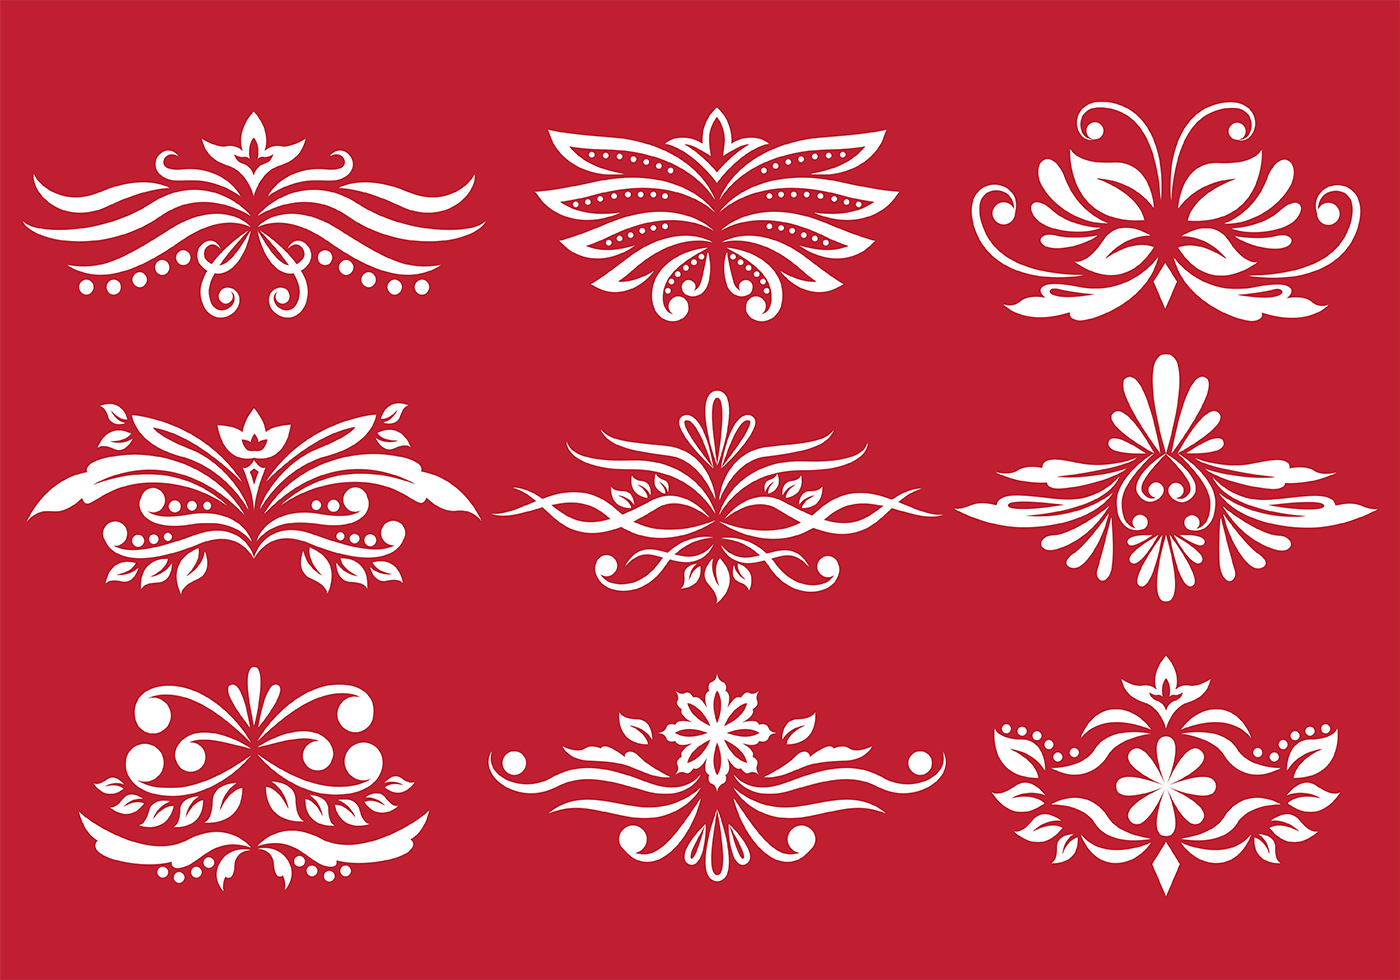 Cartouche vector icon set with scrollwork designs. 